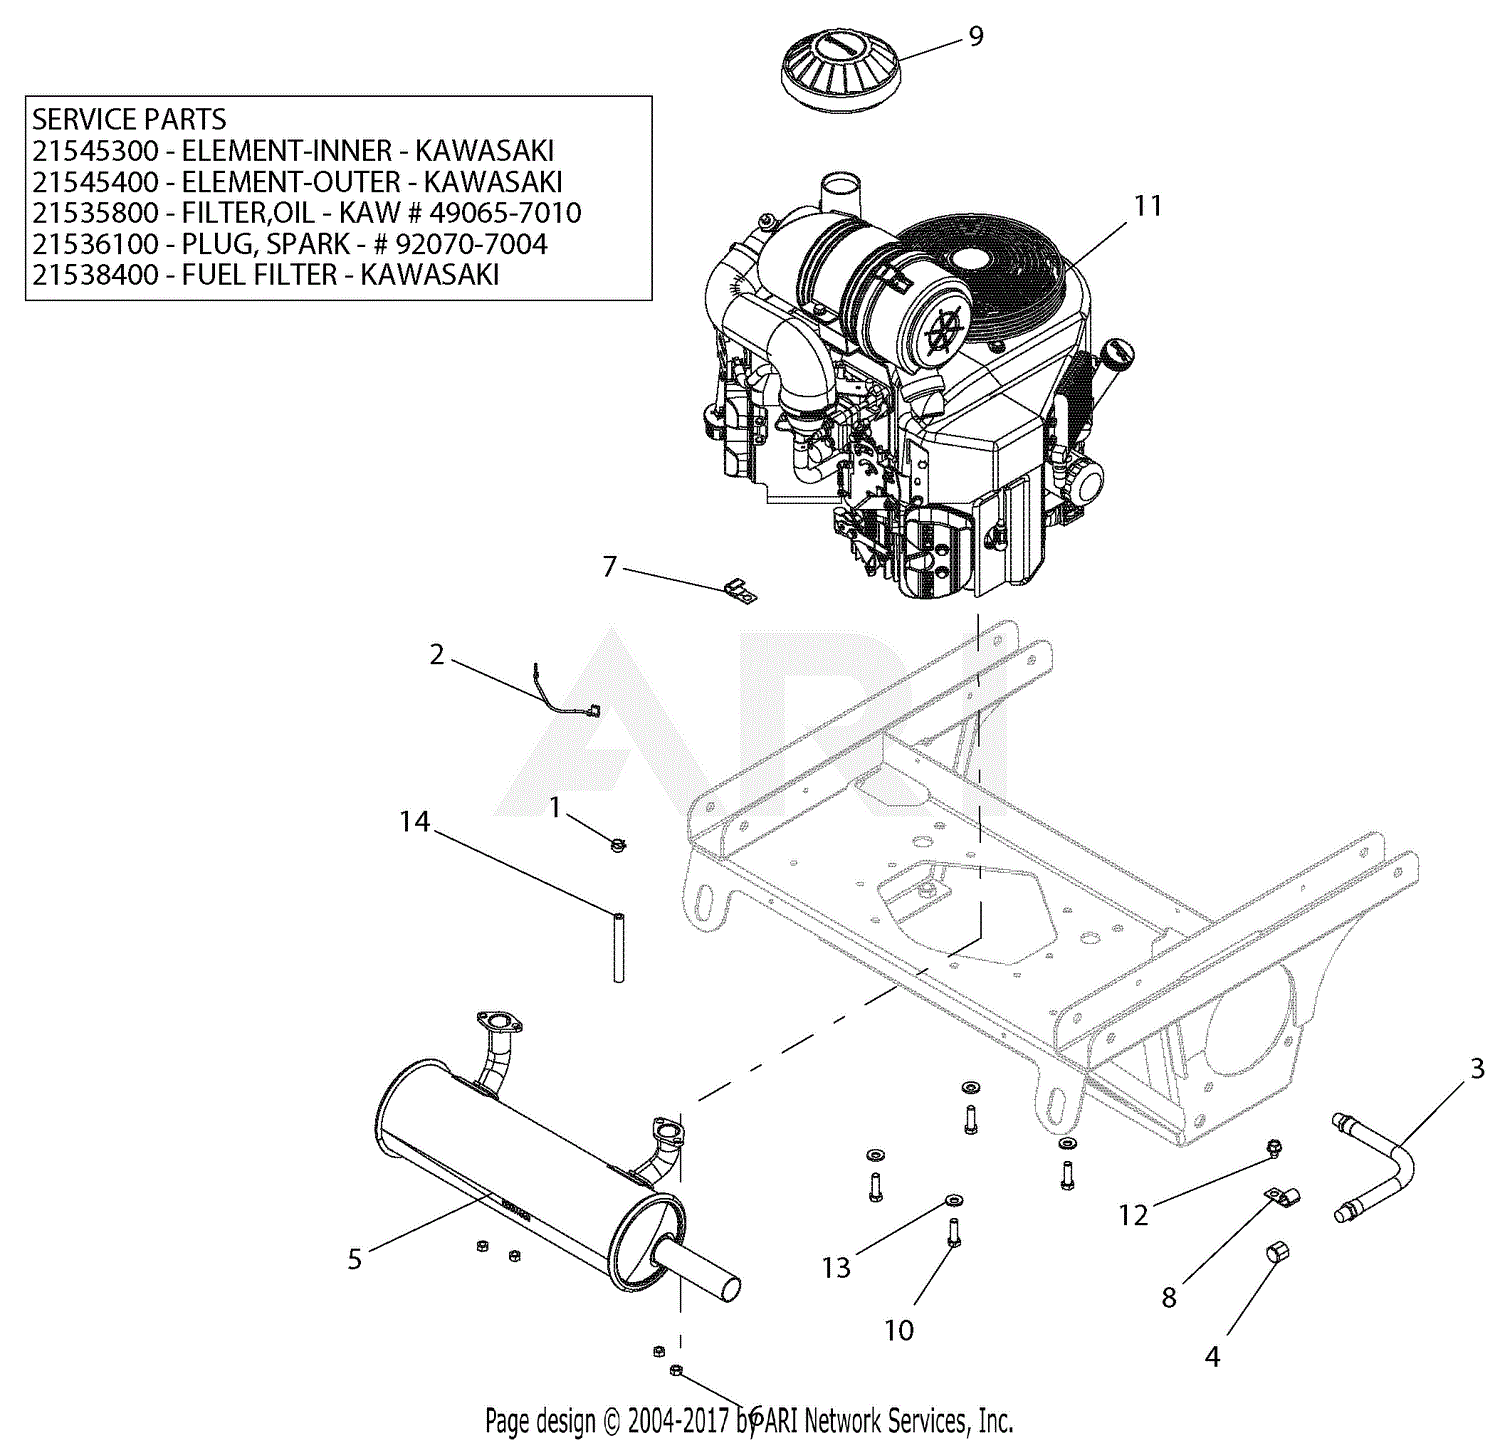 Kuhn Gmd 700 Disc Mower Parts Diagram * Wiring And Engine.